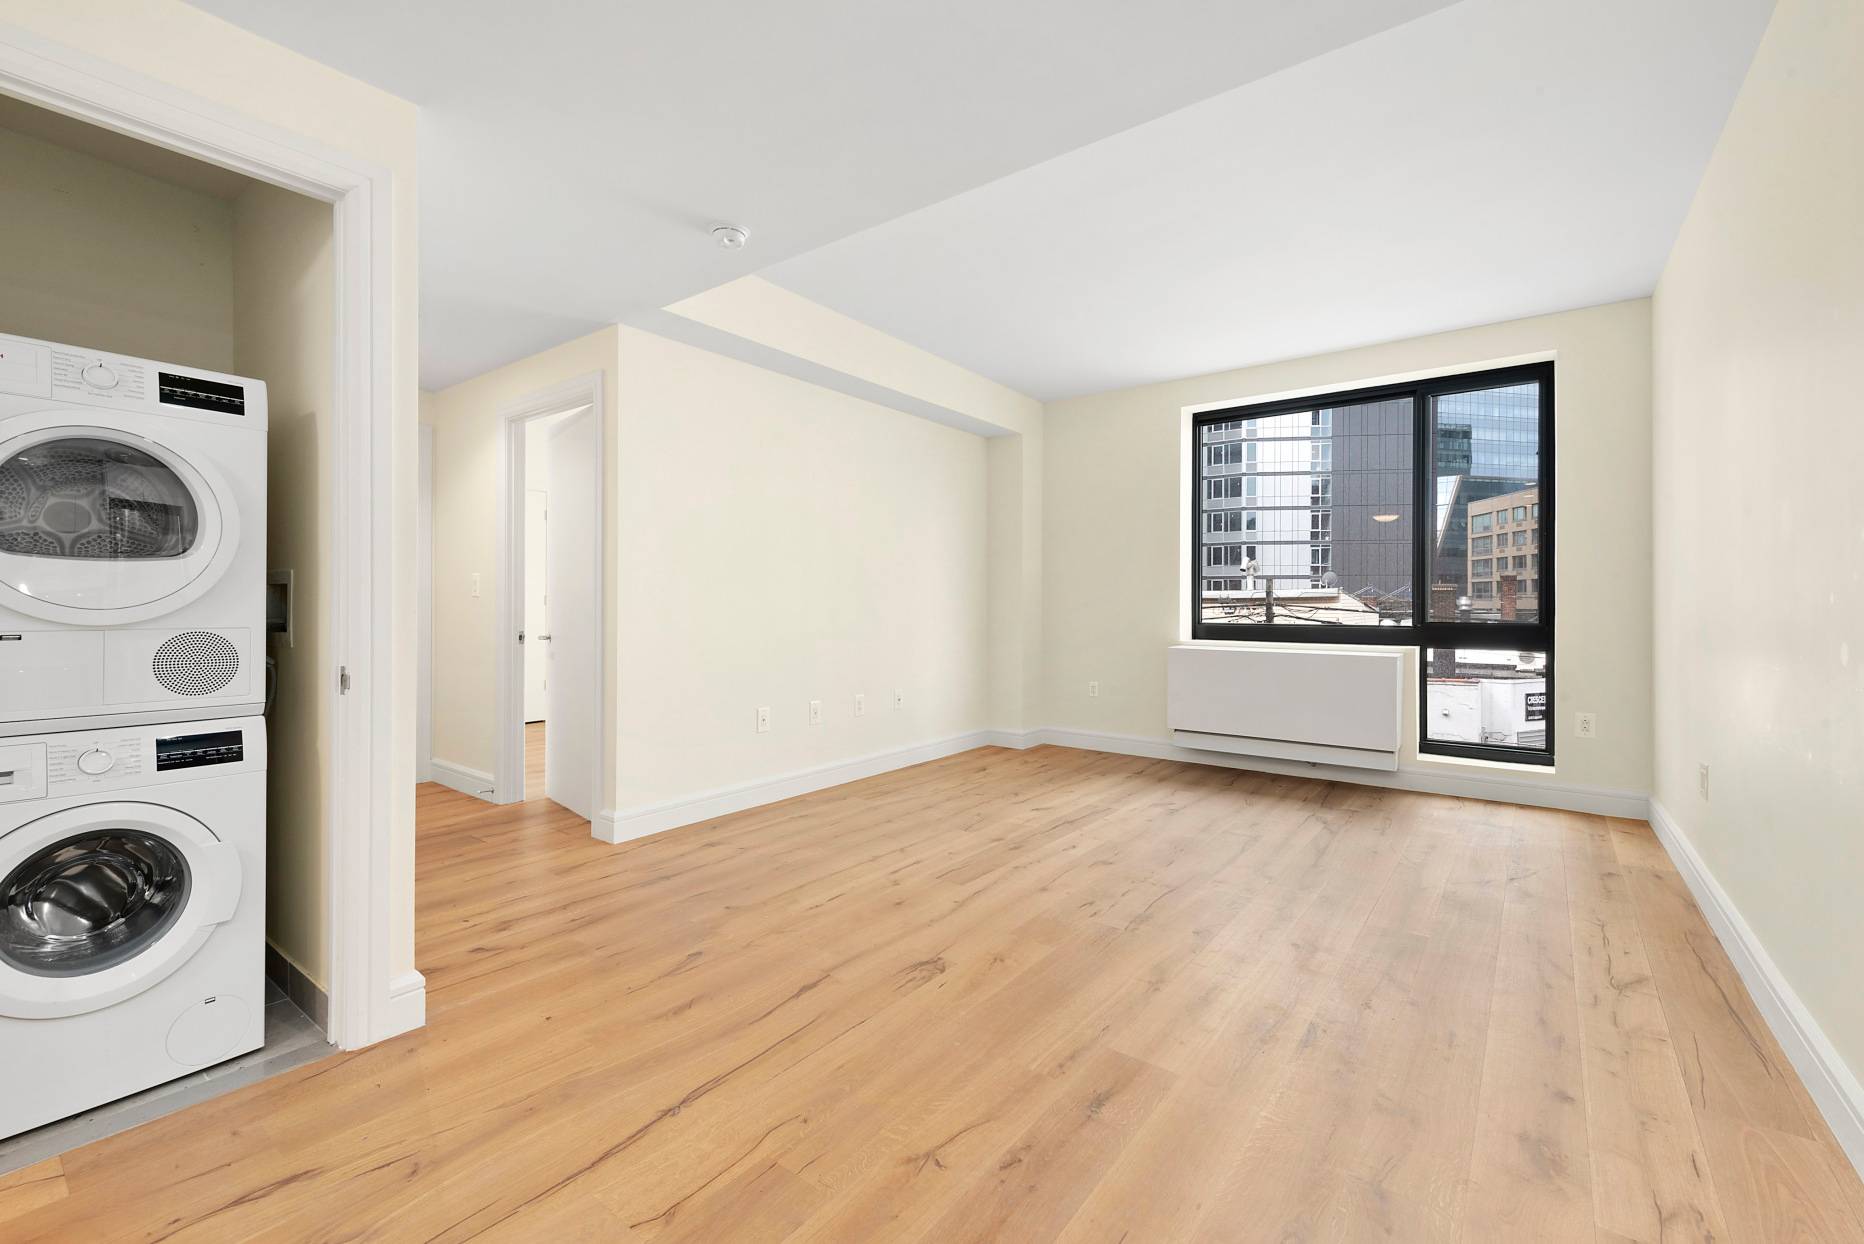 No Fee ! 1 Bedroom Lux apartment in the heart of LIC This residence boast natural sunlight with southern exposure.